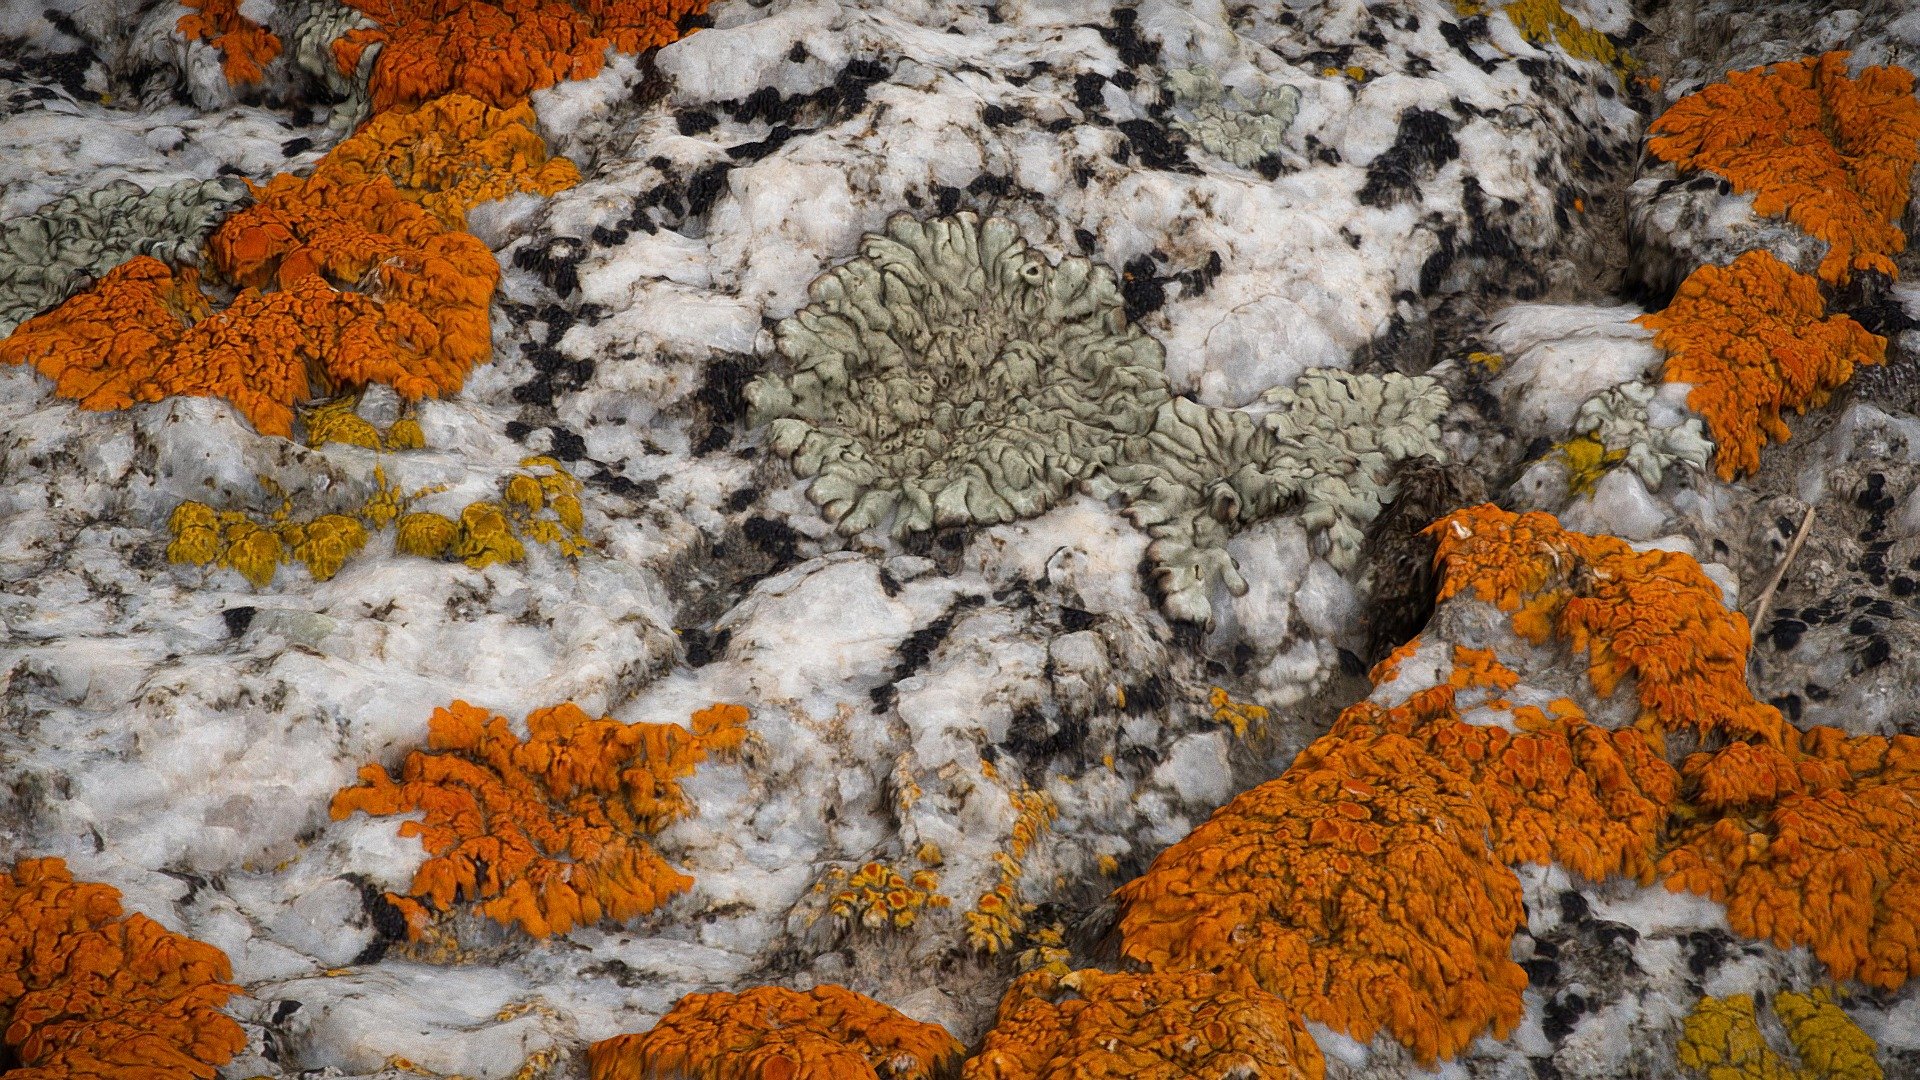 photogrammetry scans of lichens on granite - Montana

download includes model as an OBJ and two texture files - Lichens on Granite - Montana - Buy Royalty Free 3D model by TShahan 3d model